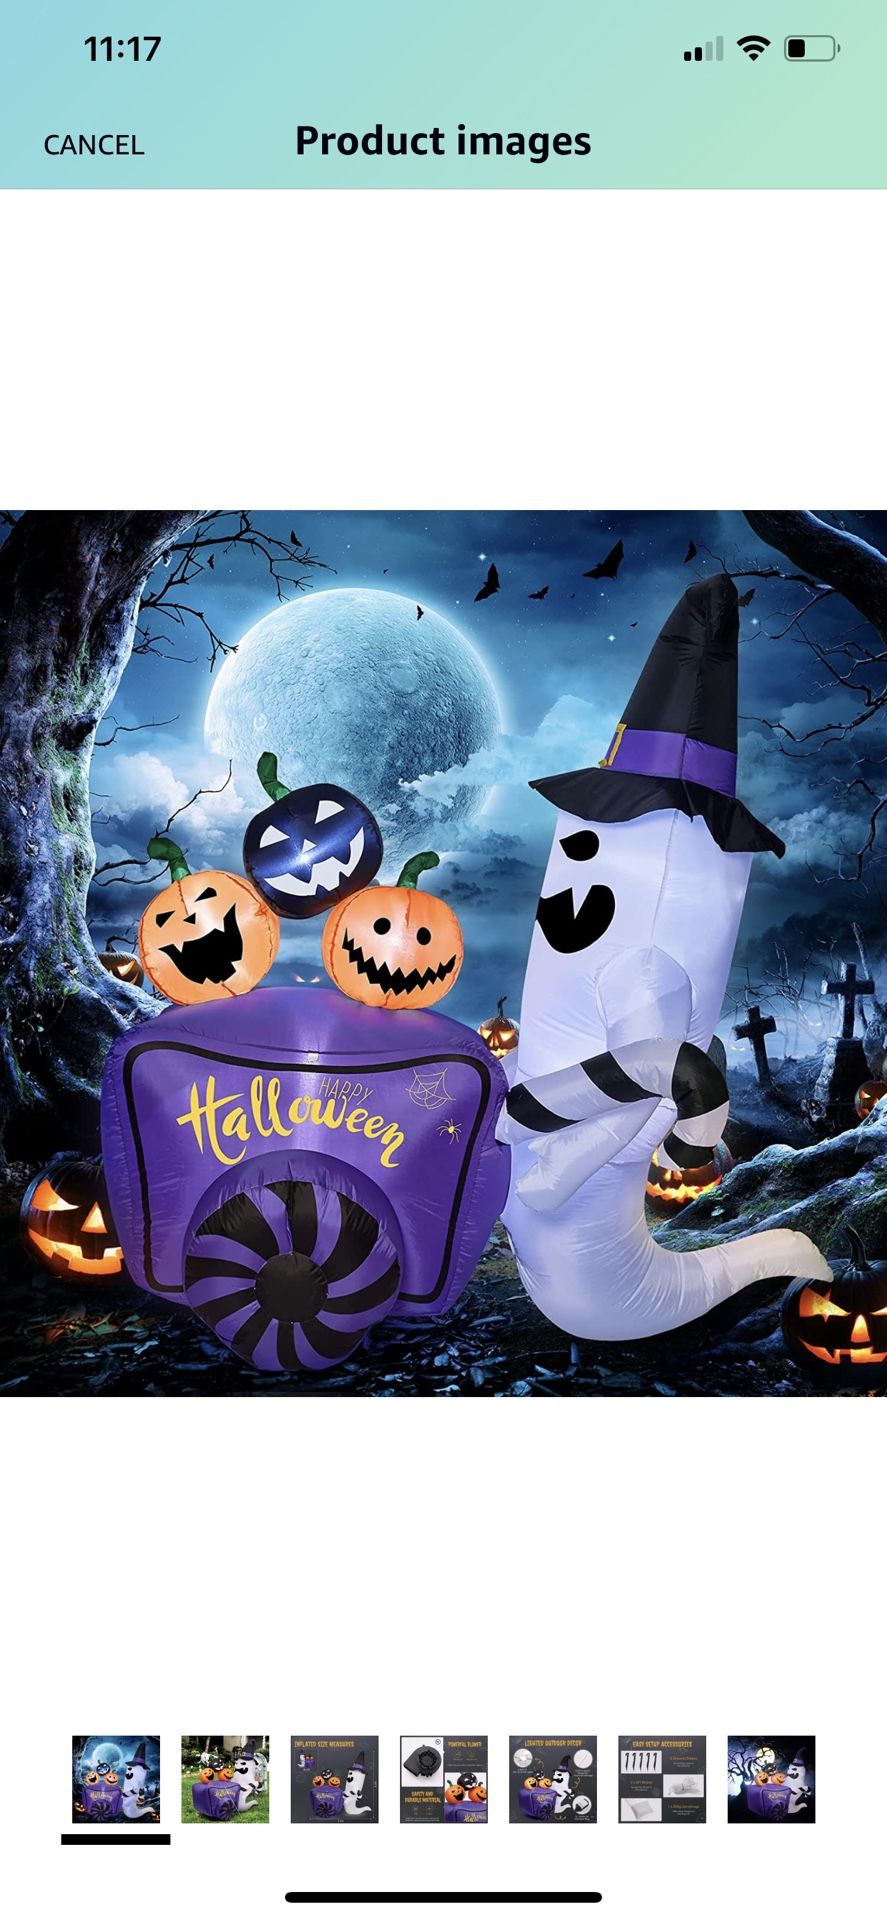  6 Ft Blow Up Halloween Inflatable White Ghost with Pumpkin Cart, Halloween Blow Up Yard Decoration with LED Light for Lawn Home Party Indoor Outdoor